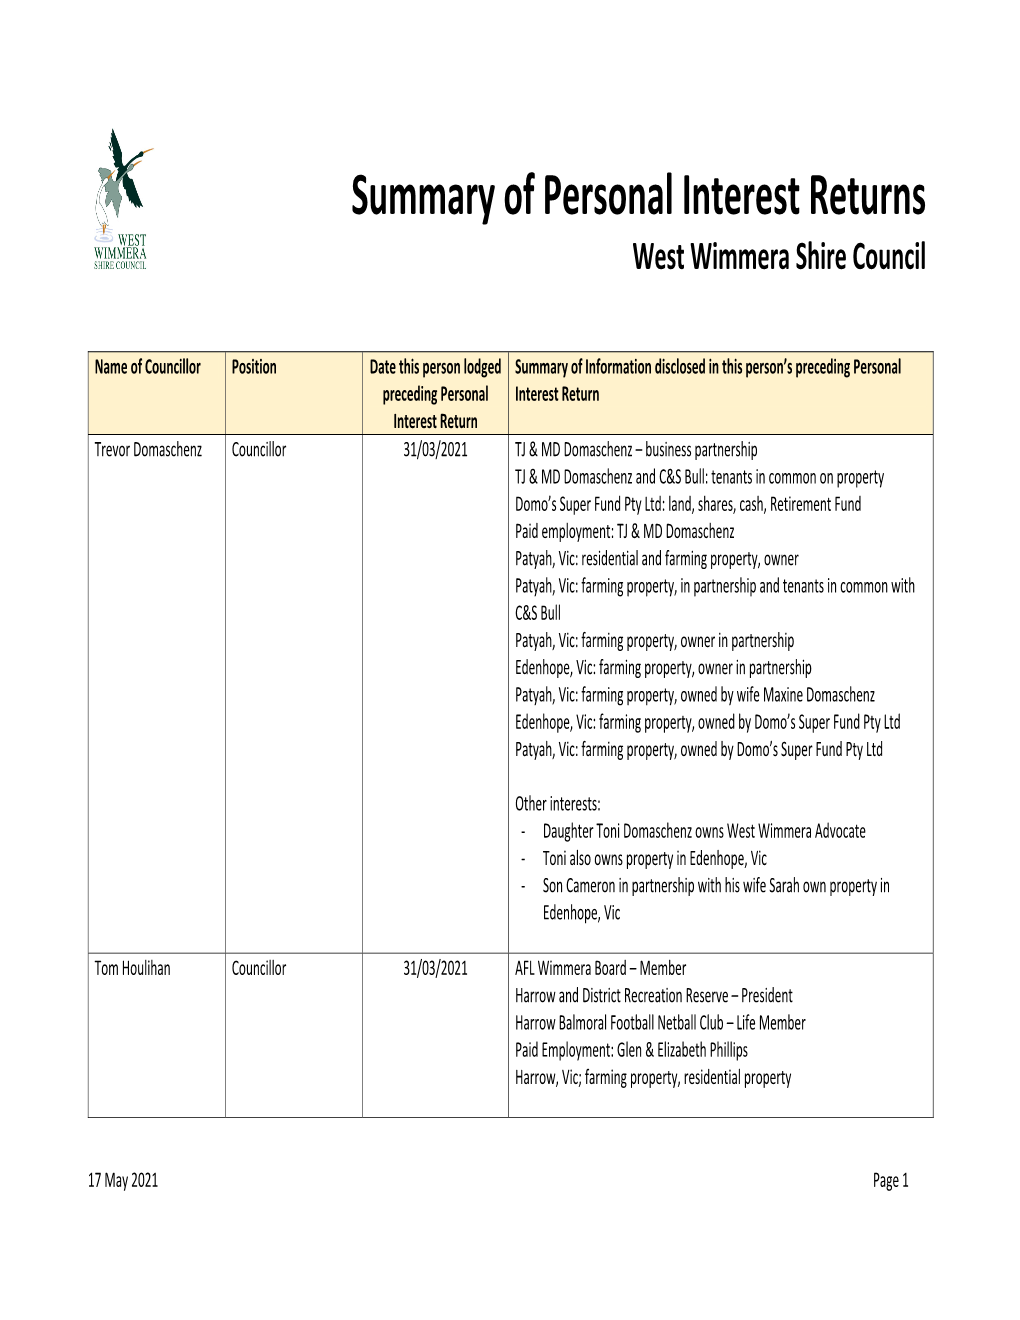 Summary of Personal Interest Returns West Wimmera Shire Council